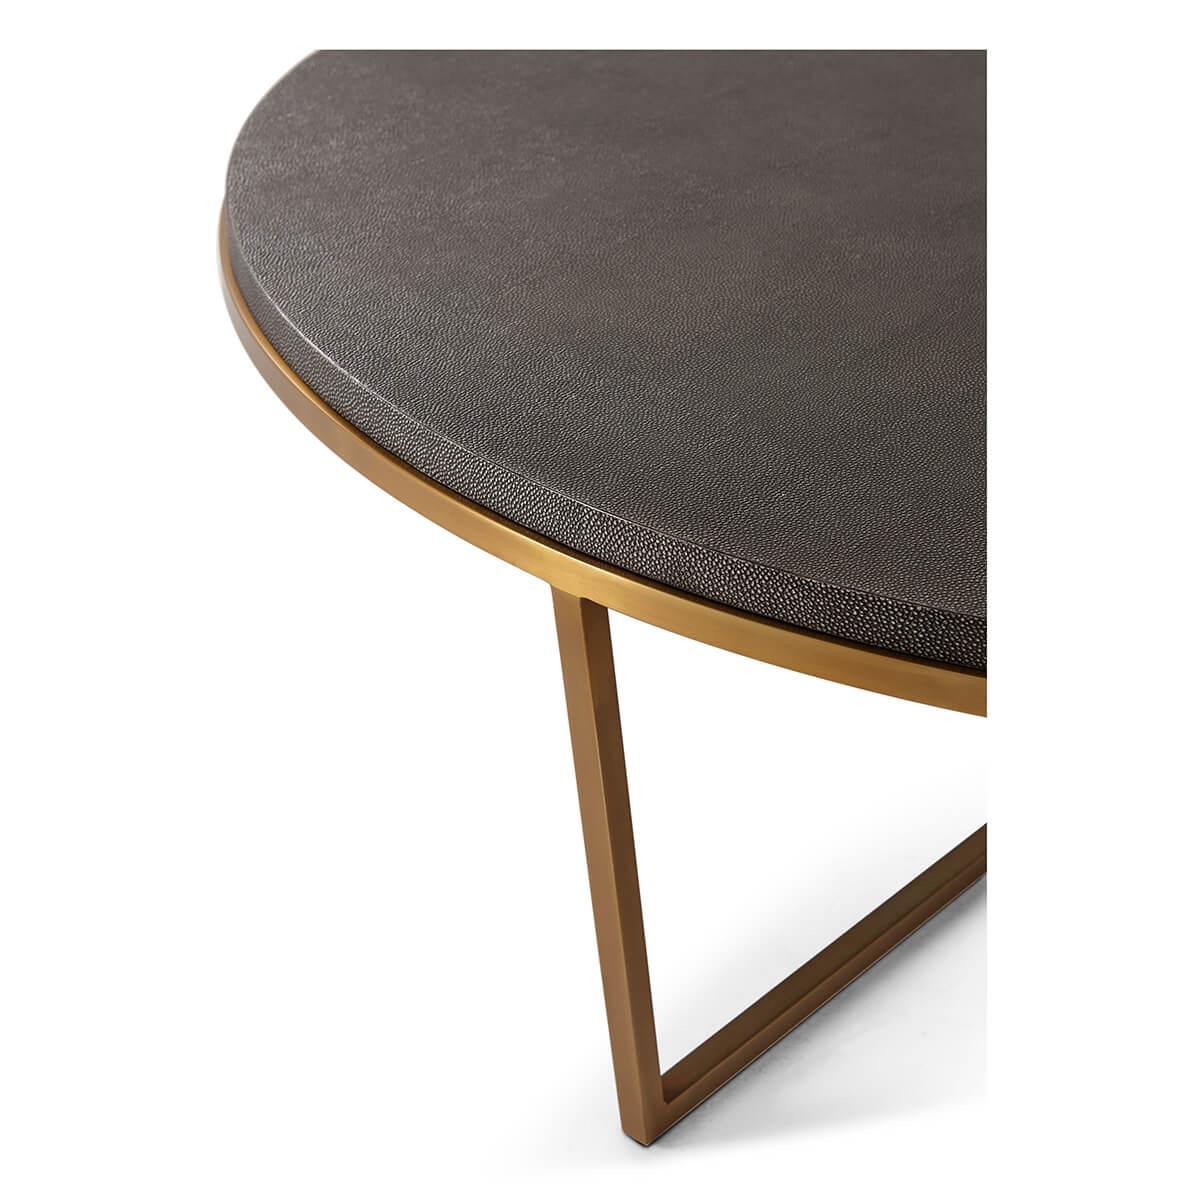 A modern leather top coffee table with a stepped edge. This circular embossed dark leather top rests on a polished brass finish base.

Dimensions: 47.25